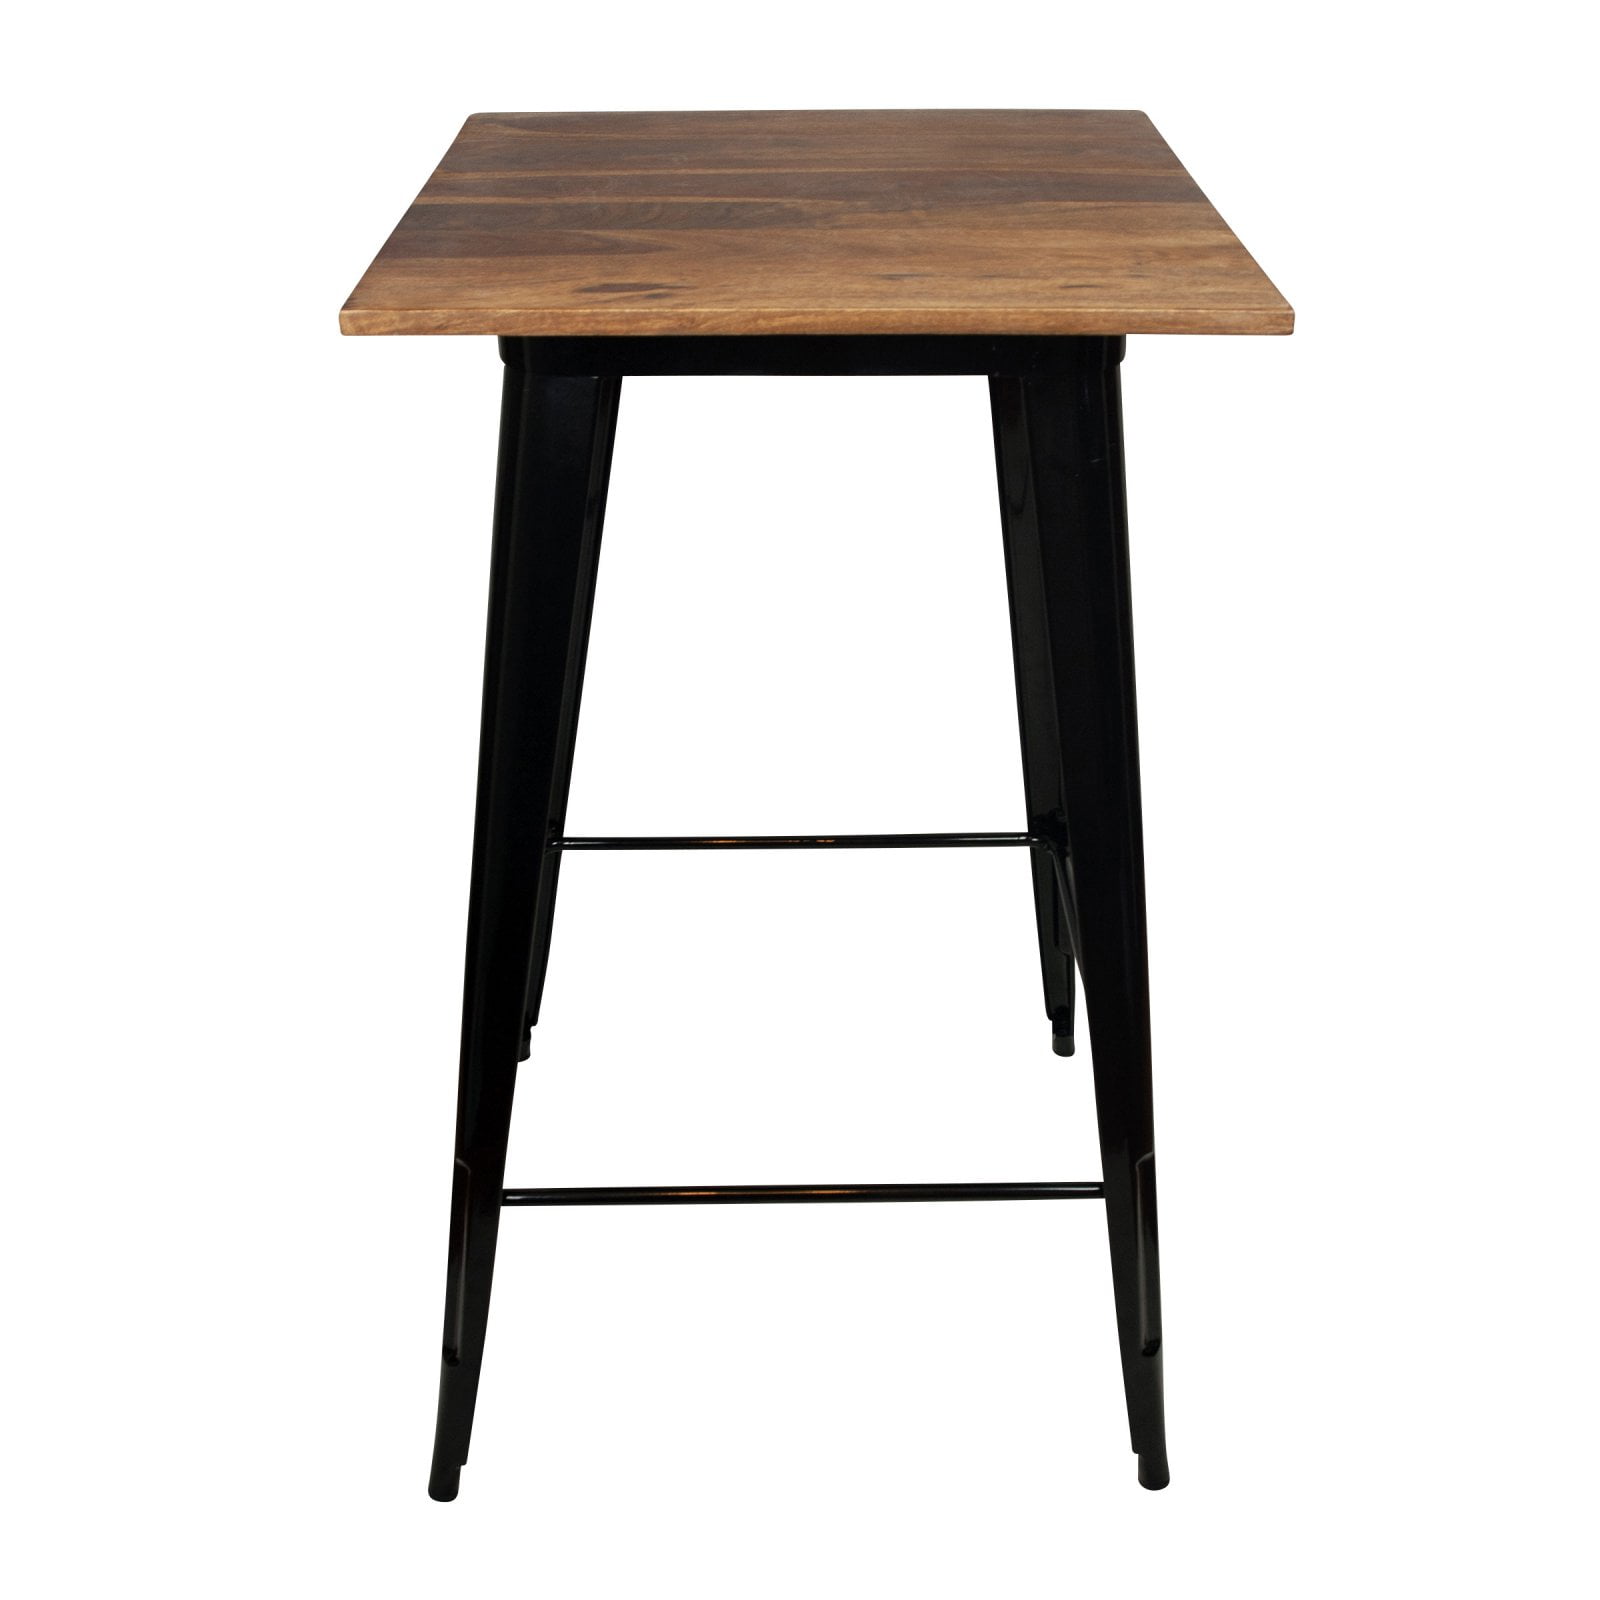 Swpubtb 24 X 24 In. Pub-height Black Table With Rosewood Top & Metal Legs, Seats 2 To 4